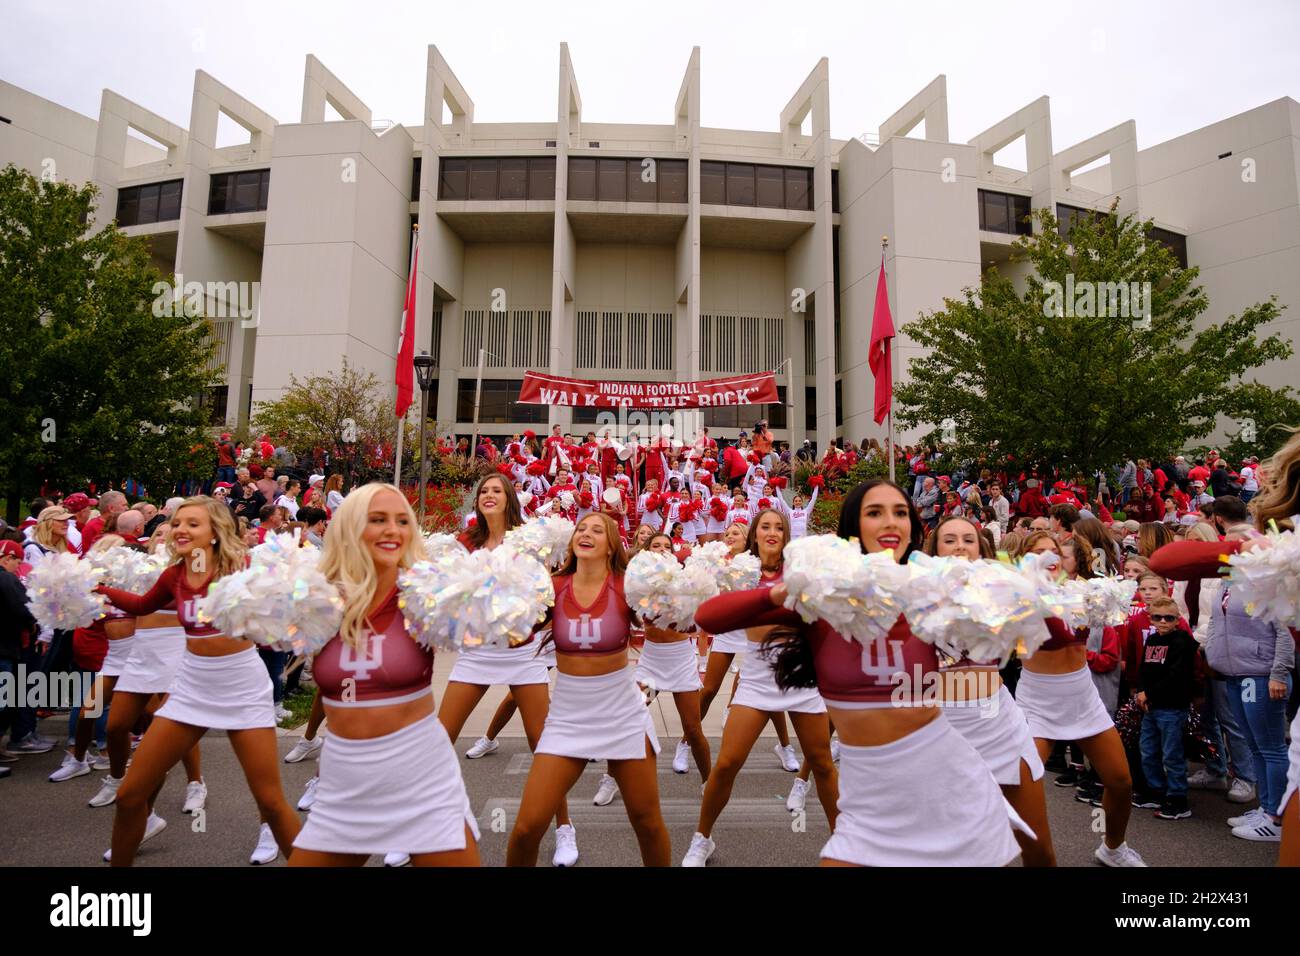 BLOOMINGTON, UNITED STATES - 2021/10/23: Indiana University’s cheerleaders and the Redsteppers cheer on the steps to Assembly Hall before IU plays Ohio State during an NCAA football game on October 16, 2021 at Memorial Stadium in Bloomington, Ind. Ohio State beat Indiana University 54-7. Stock Photo